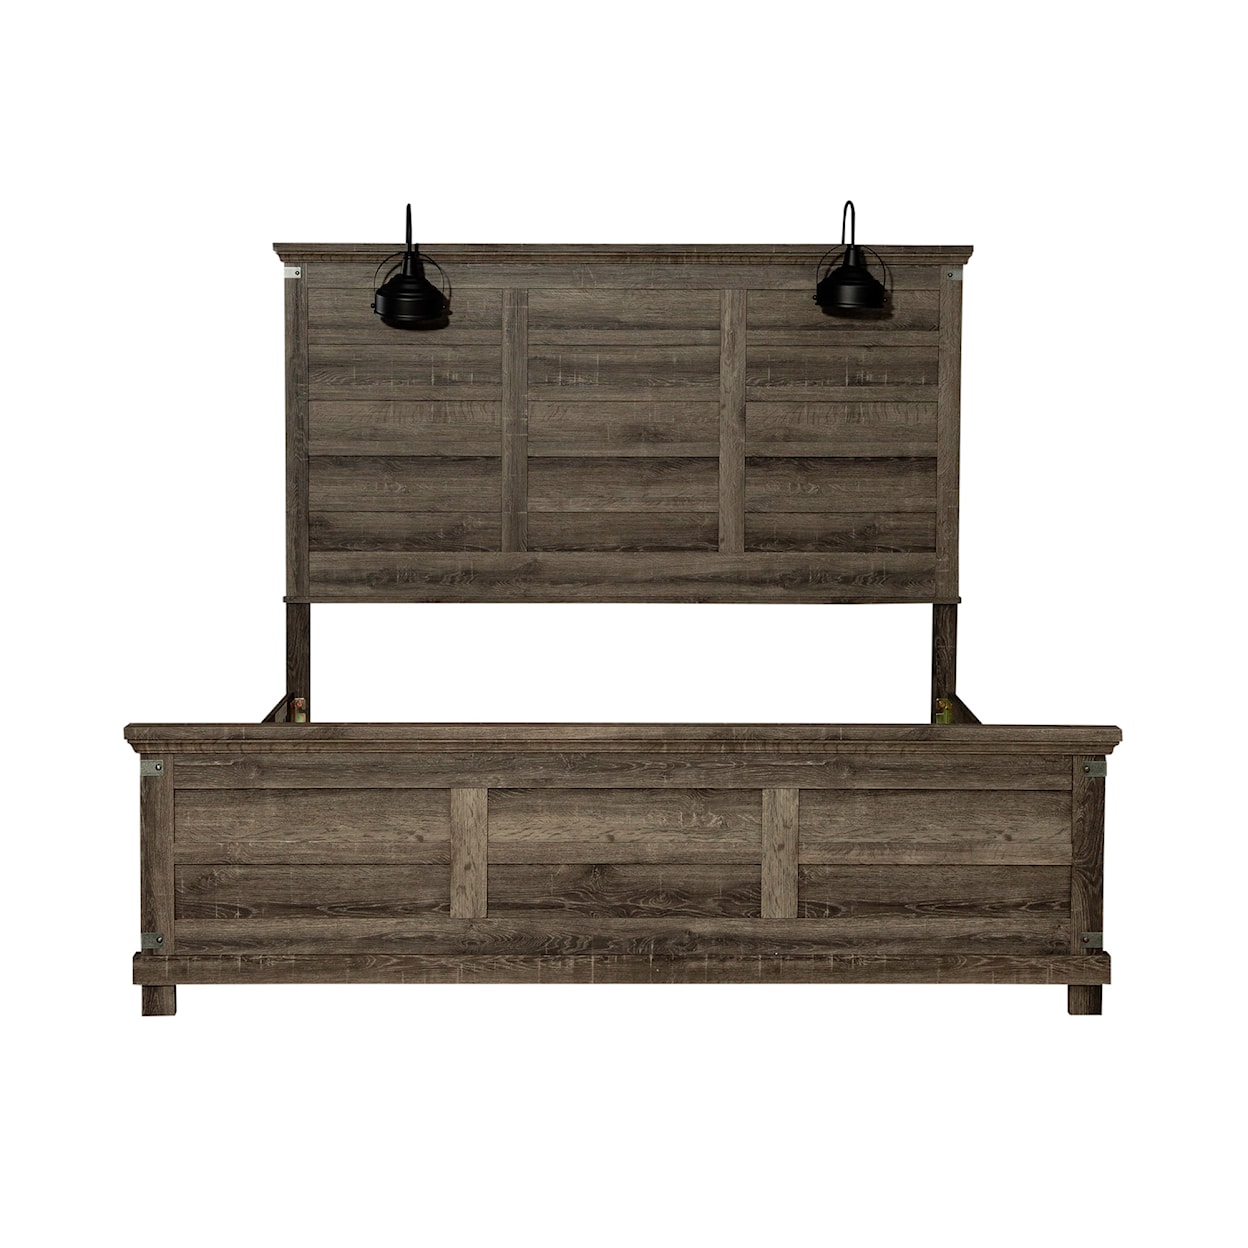 Libby Lakeside Haven King Panel Bed